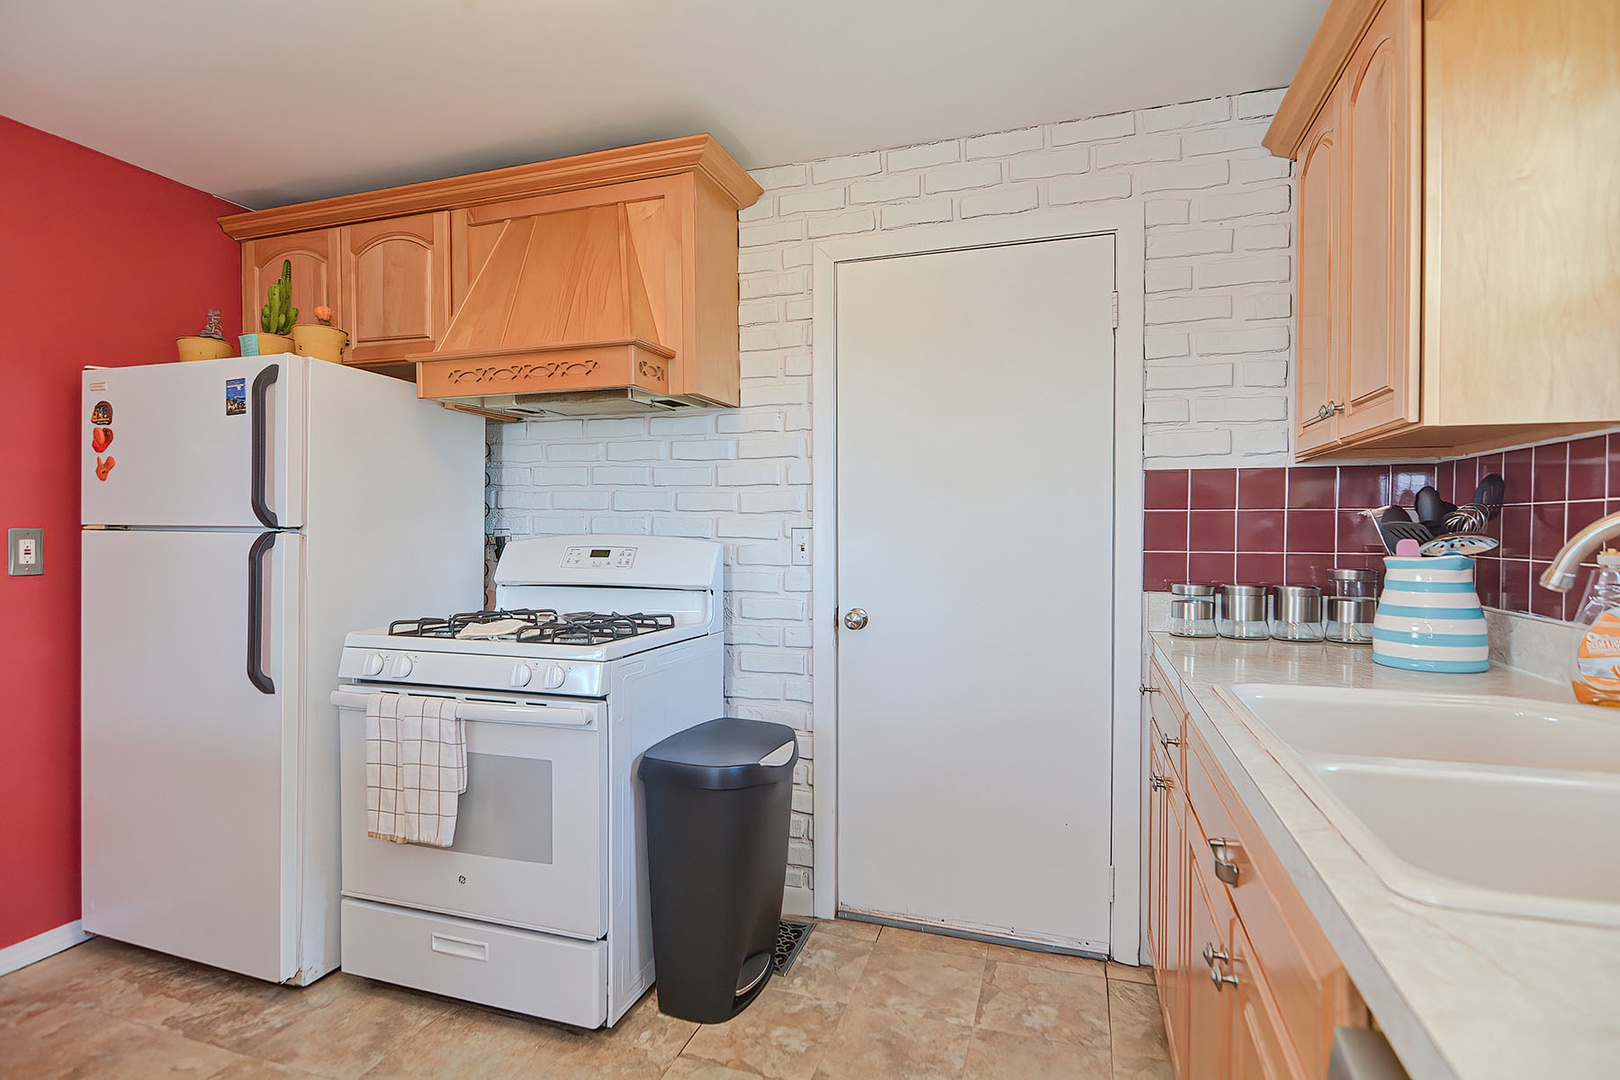 The kitchen includes a gas stove, microwave, and more.